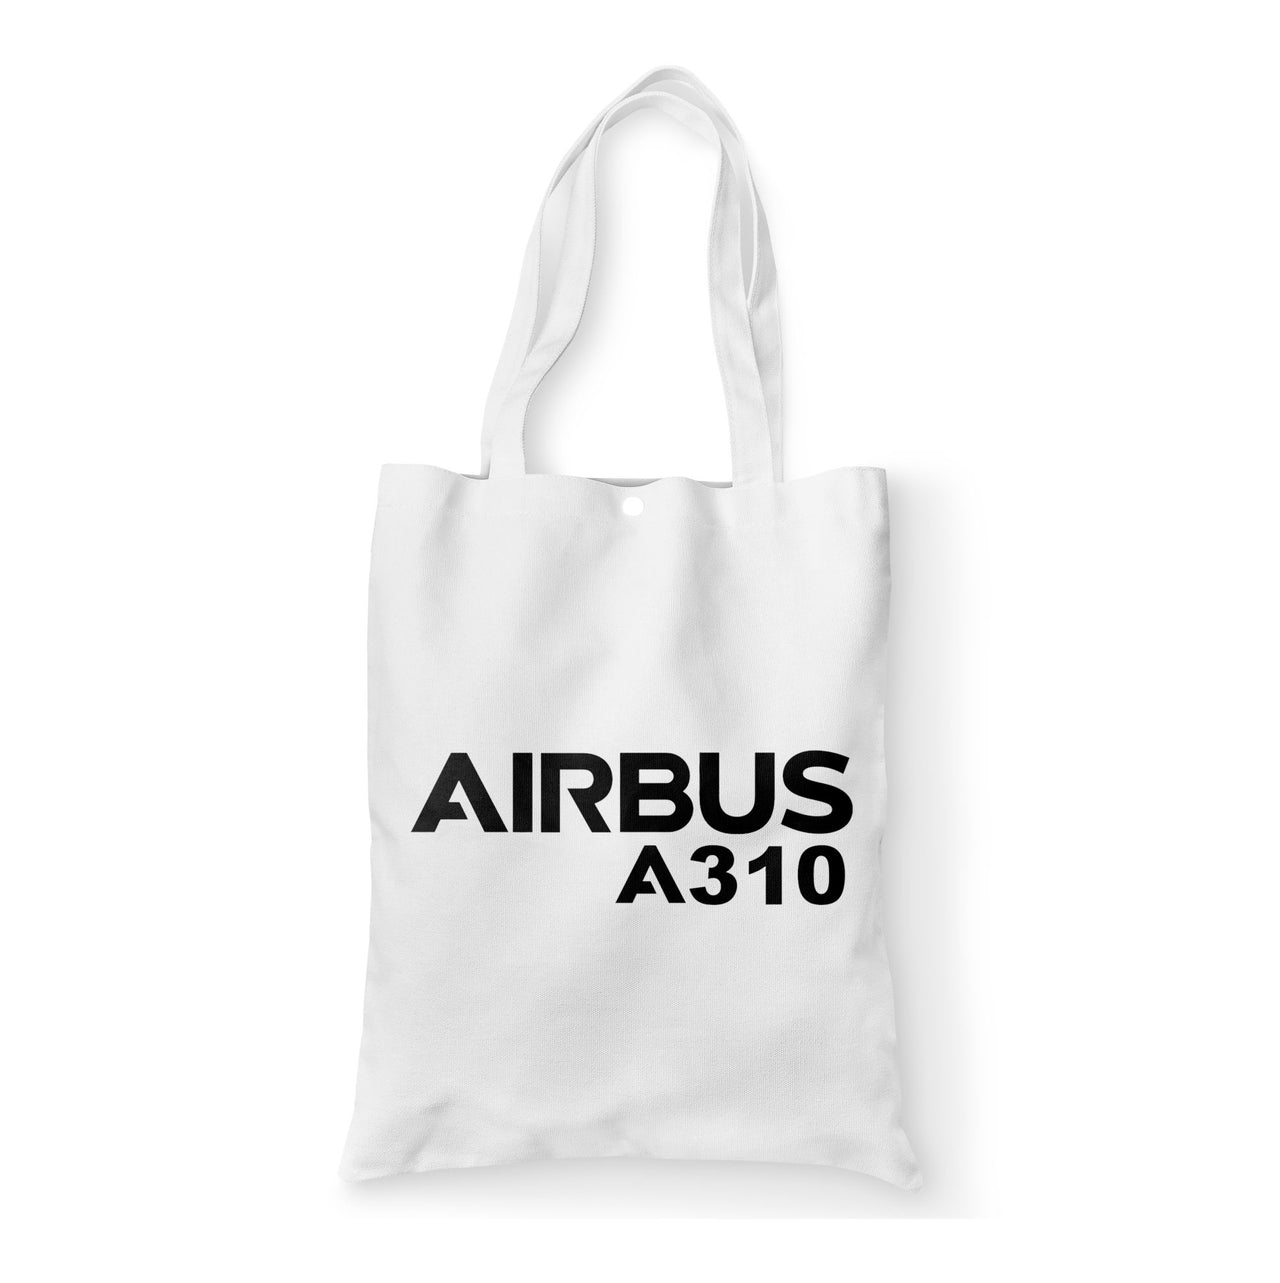 Airbus A310 & Text Designed Tote Bags